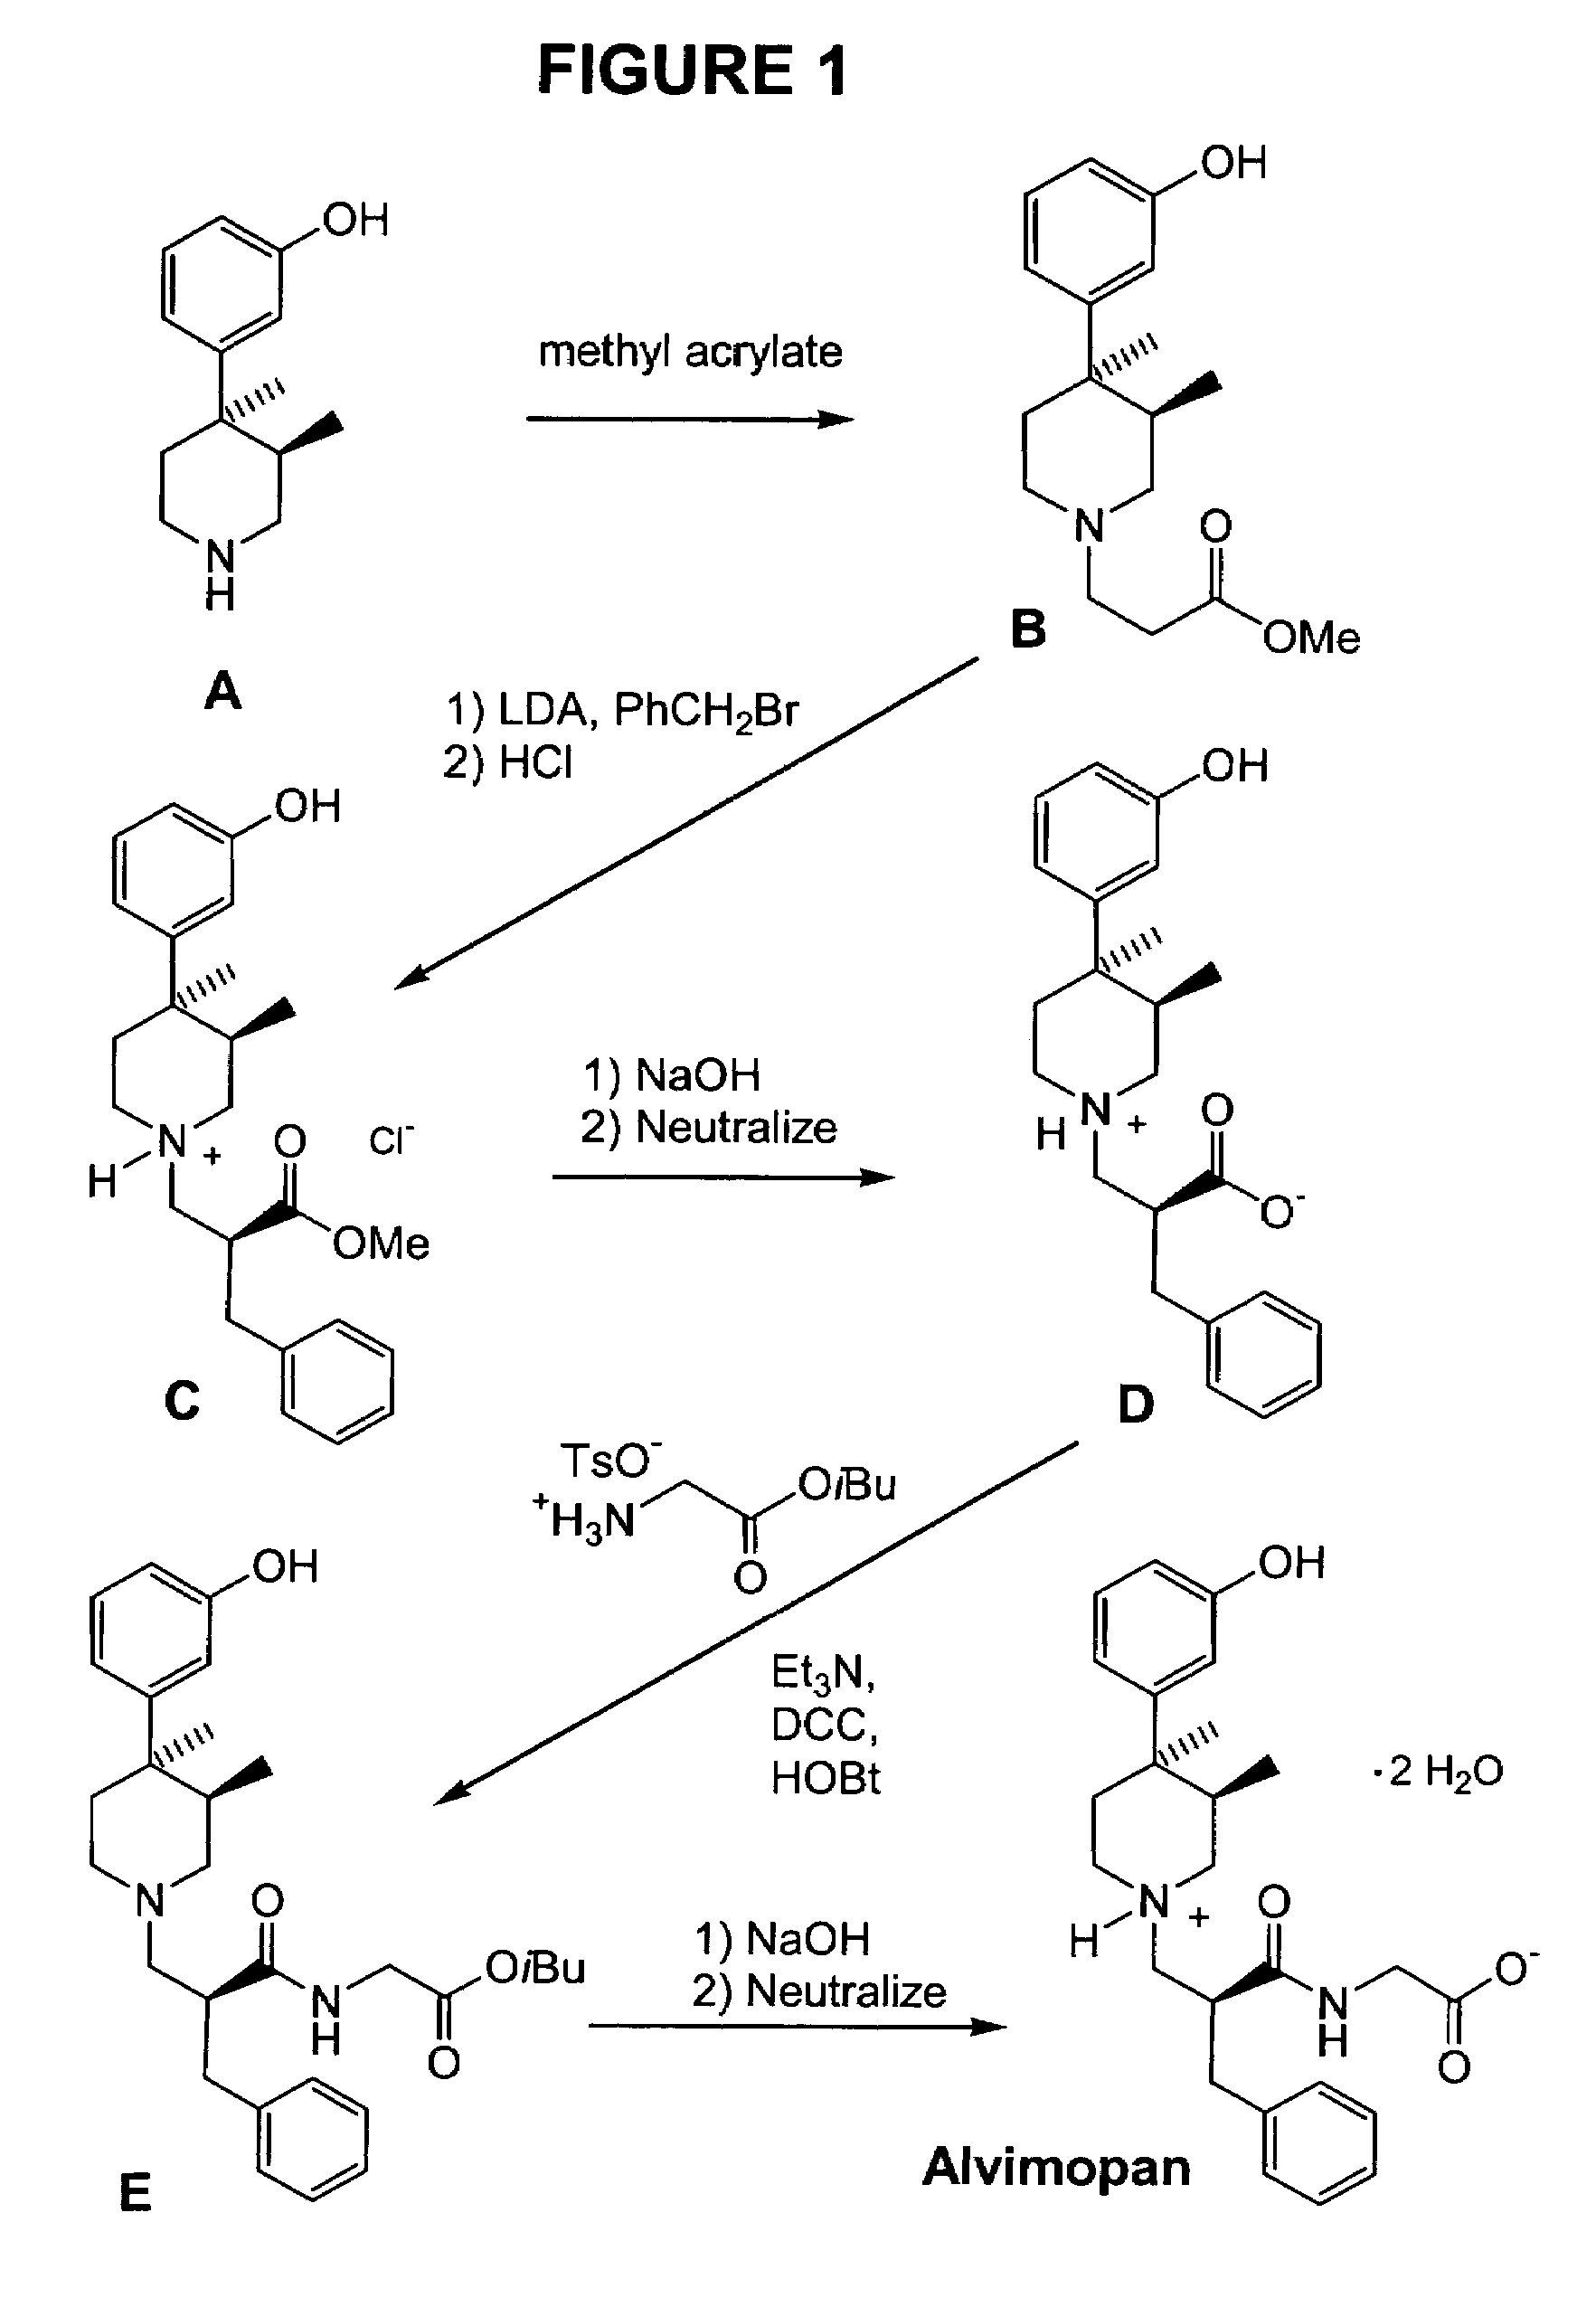 Processes for the preparation of peripheral opioid antagonist compounds and intermediates thereto